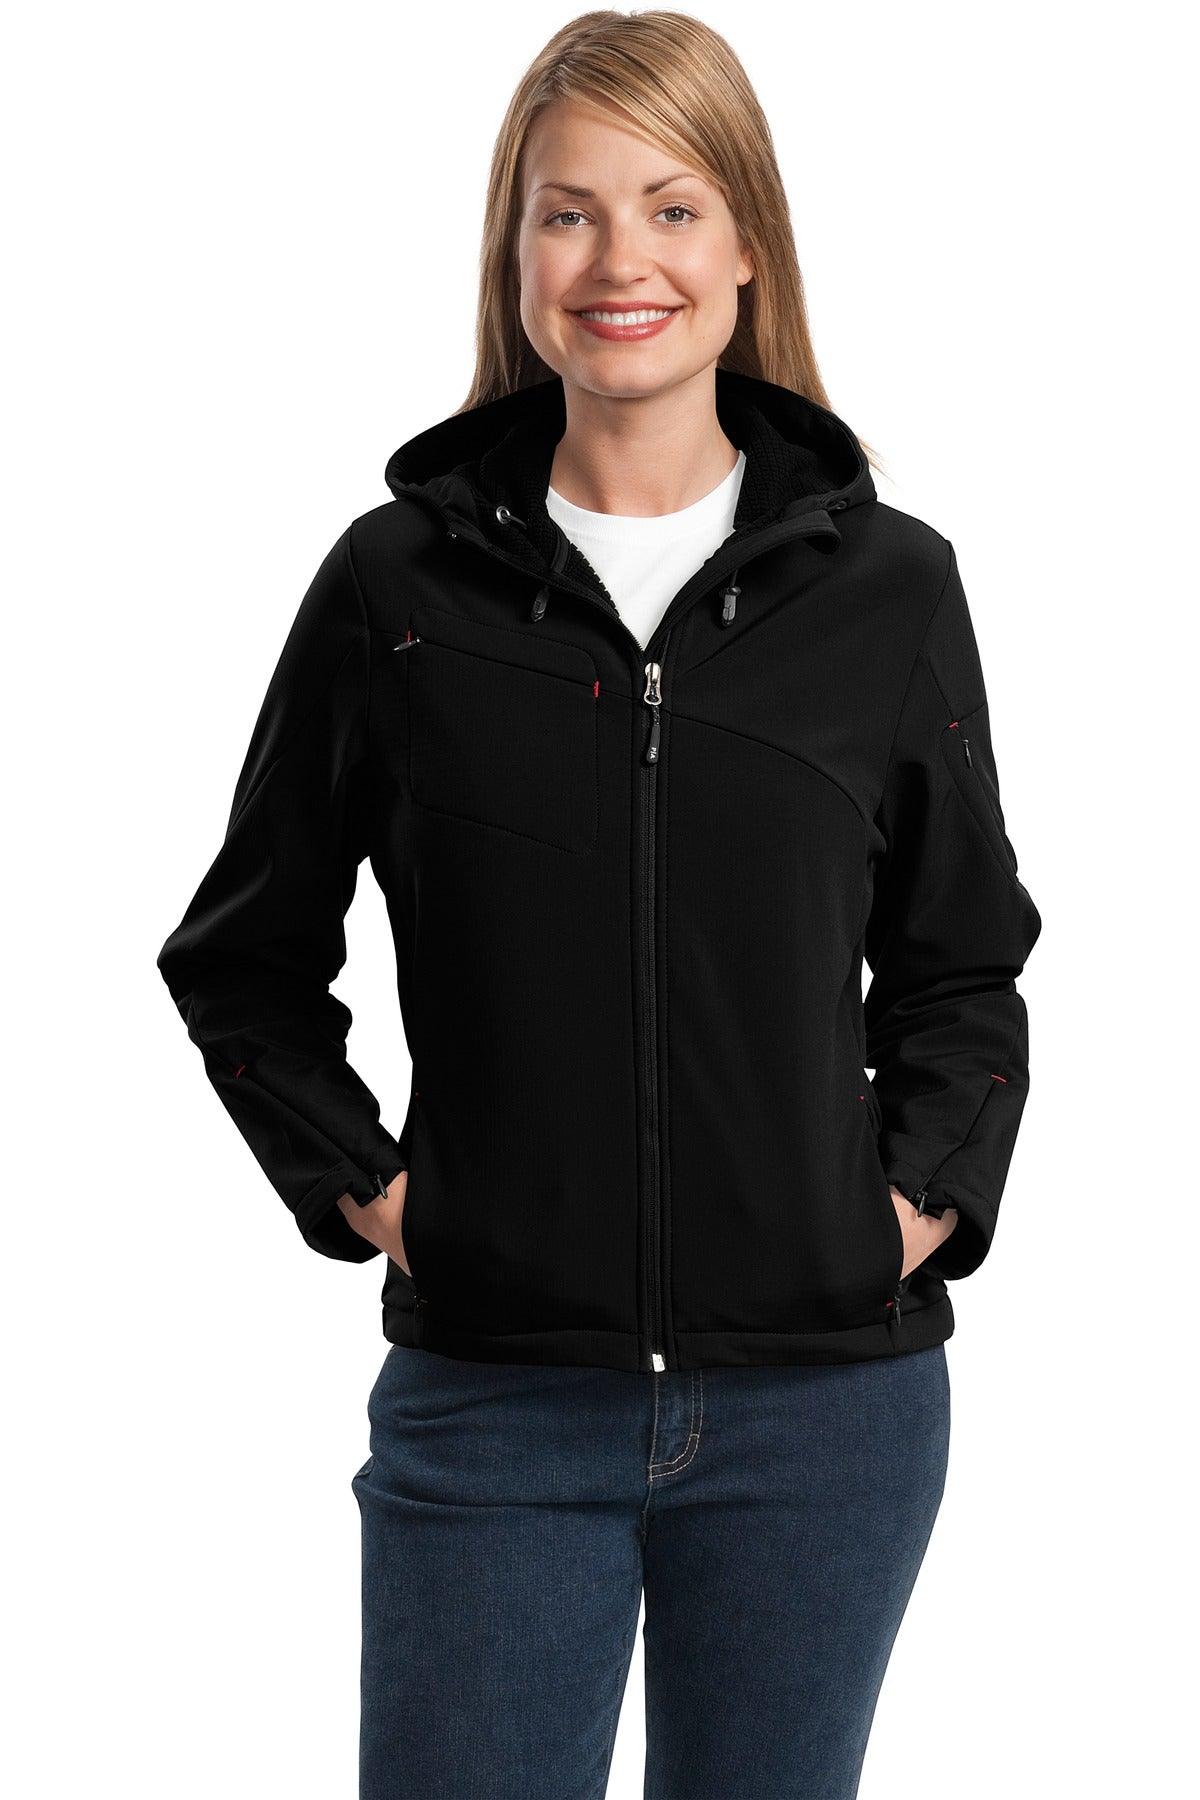 Port Authority Ladies Textured Hooded Soft Shell Jacket. L706 - Dresses Max